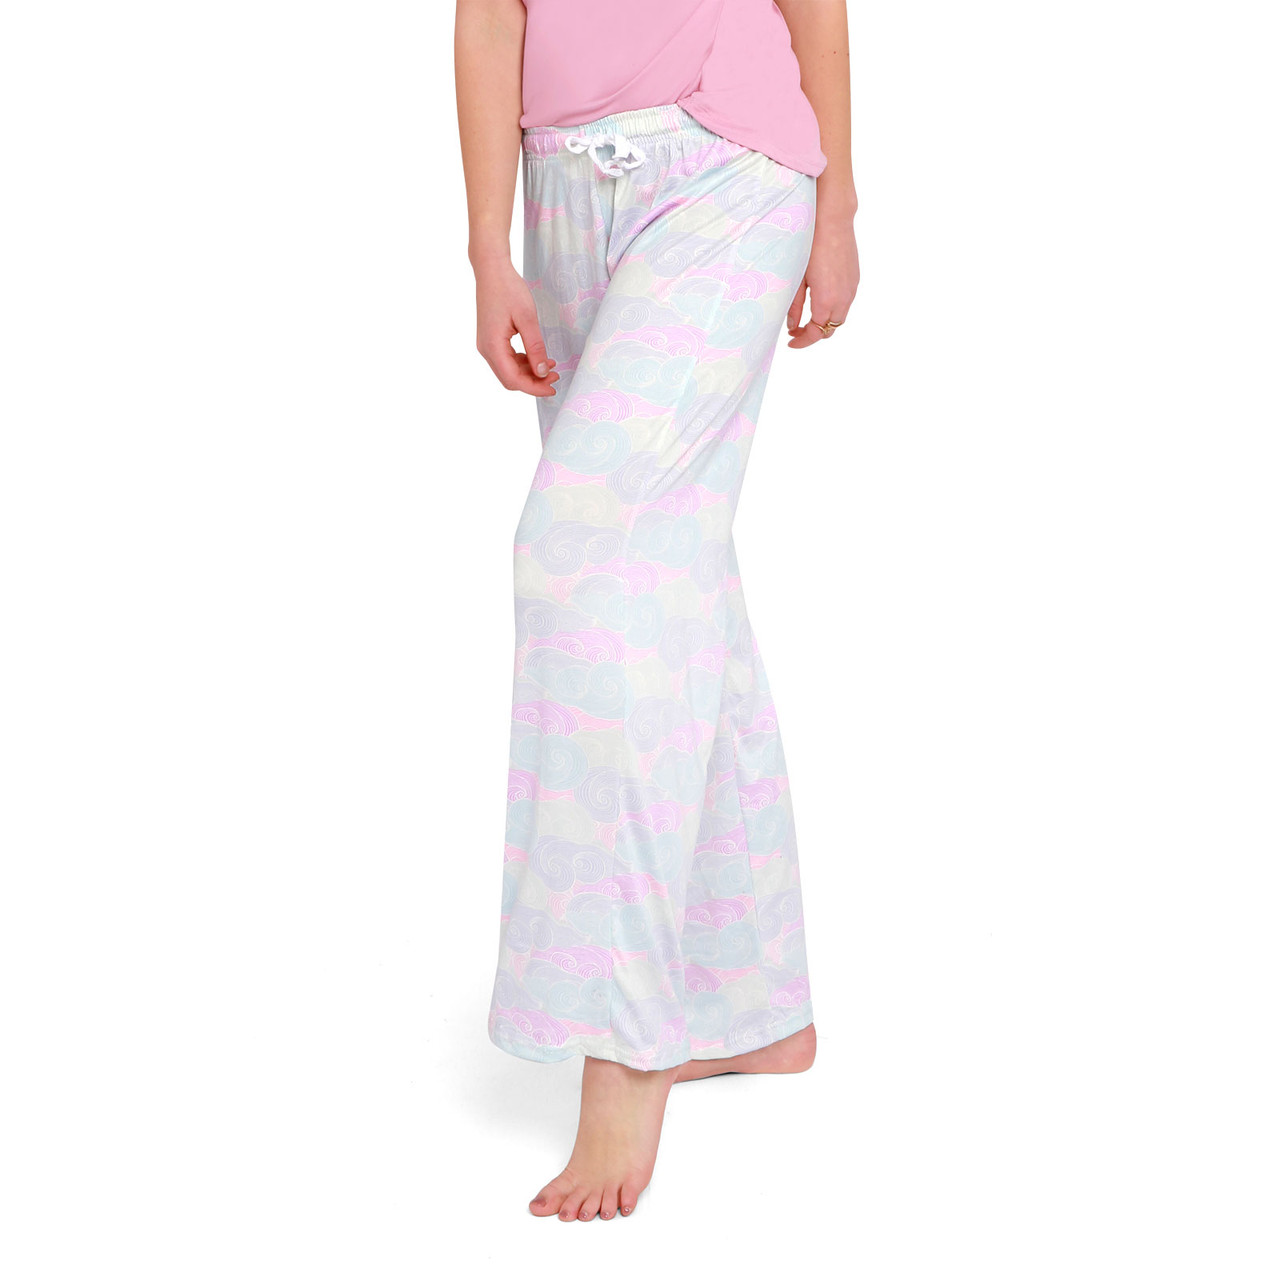 Wholesale top with palazzo pants for Sleep and Well-Being –